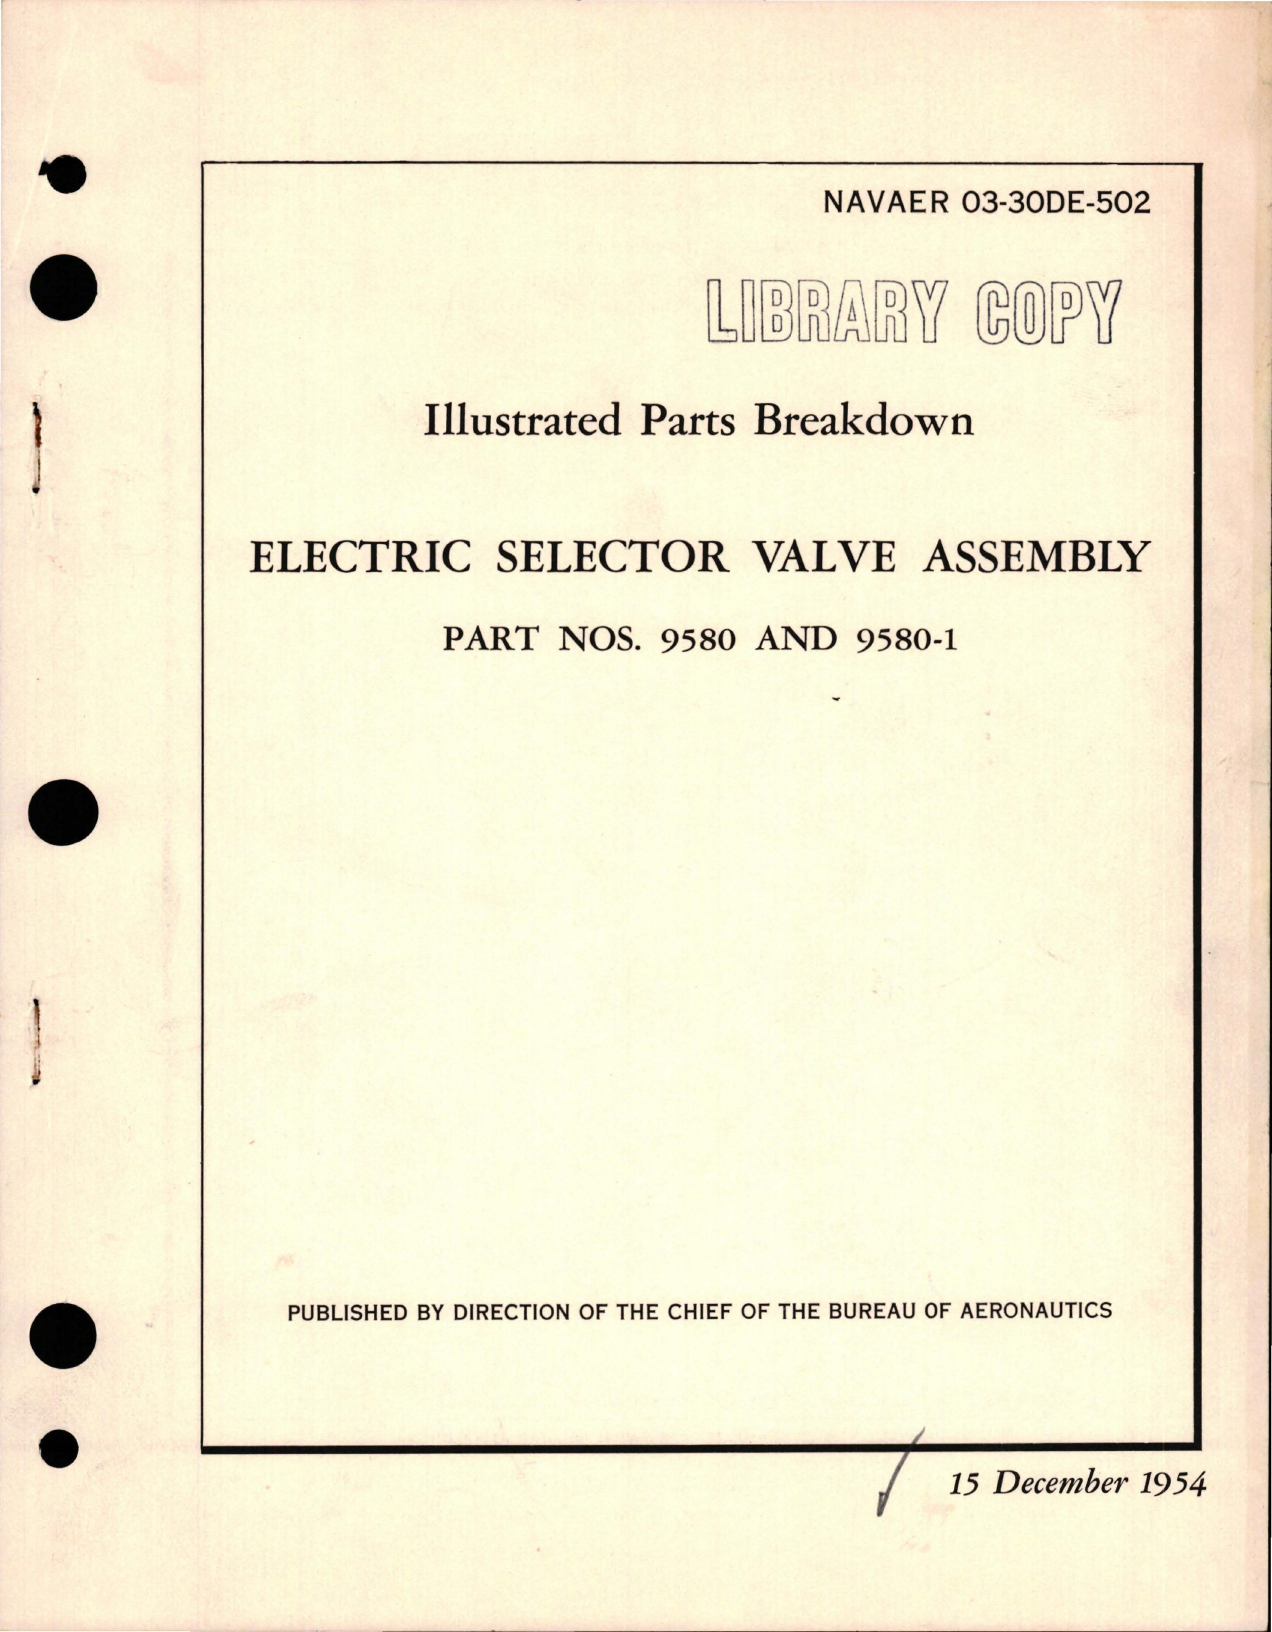 Sample page 1 from AirCorps Library document: Illustrated Parts Breakdown for Electric Selector Valve Assembly - Part 9580 and 9580-1